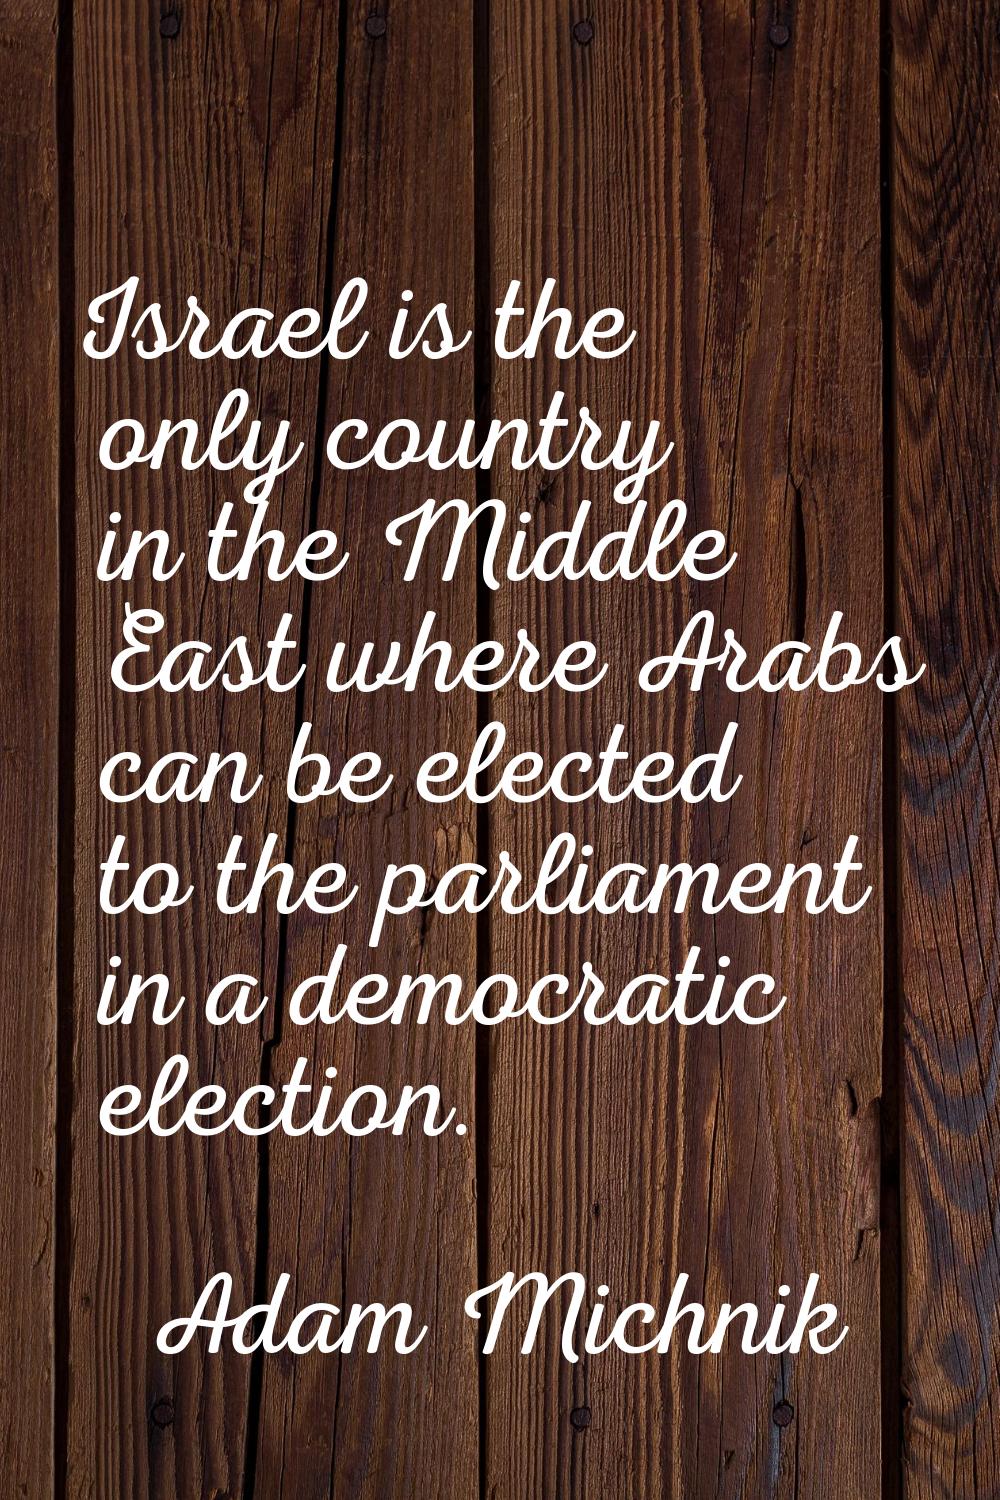 Israel is the only country in the Middle East where Arabs can be elected to the parliament in a dem